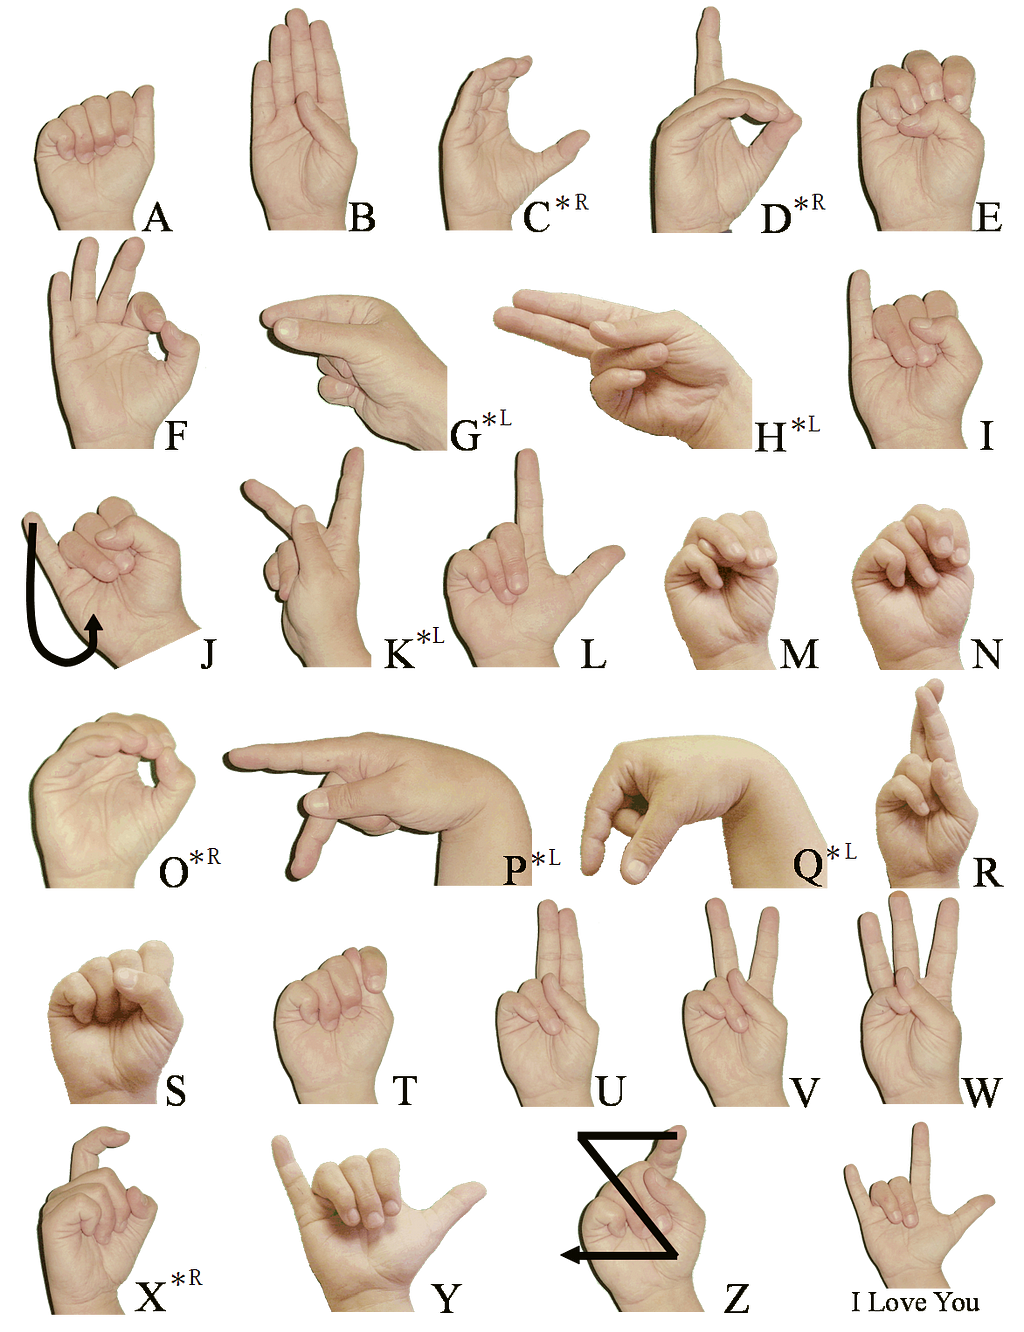 weekend-project-sign-language-and-static-gesture-recognition-using